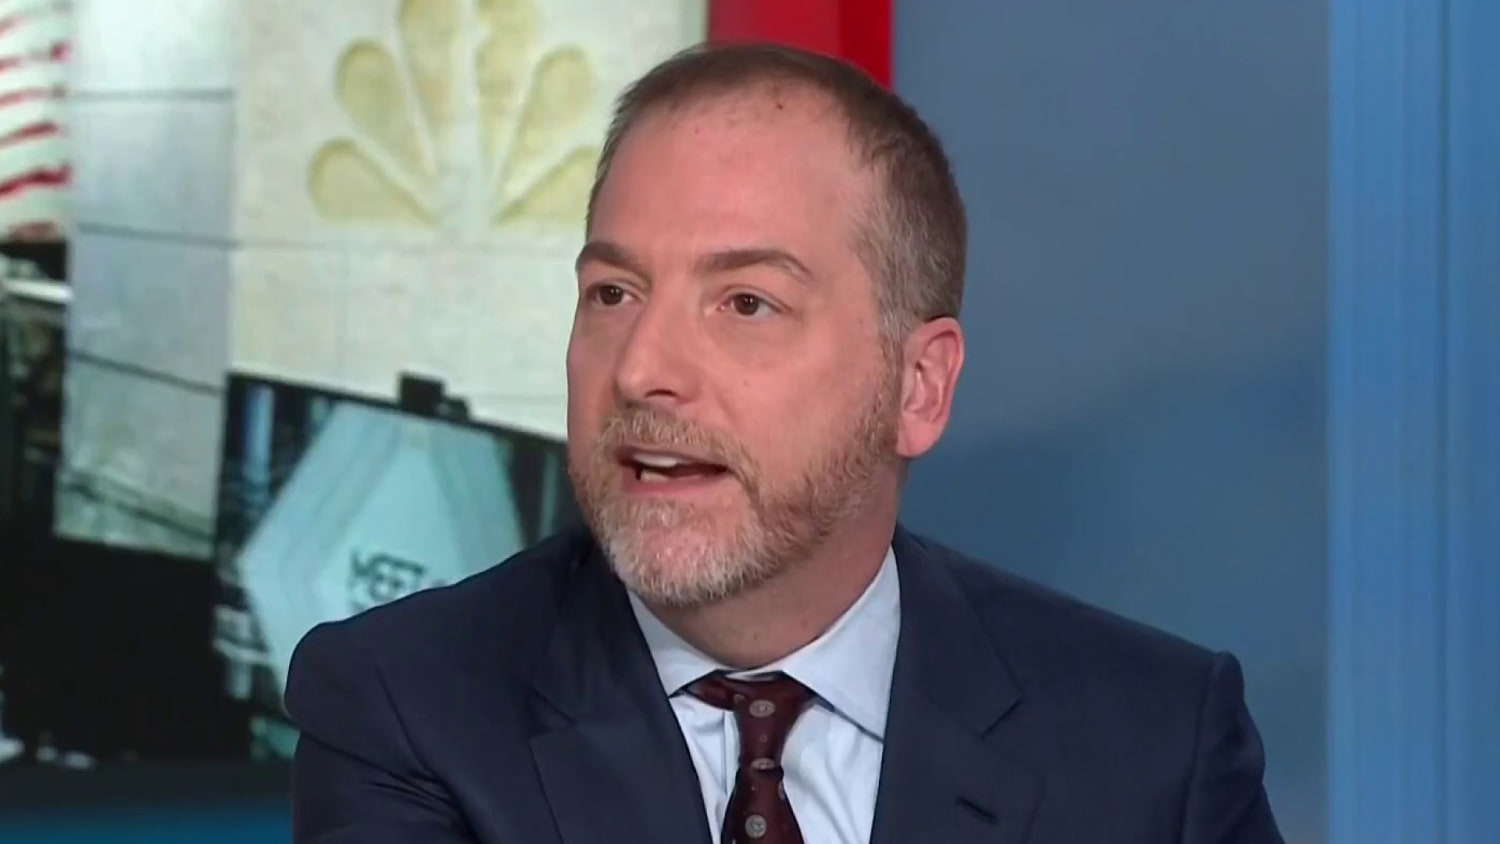 Chuck Todd: Why a political middle ground no longer 'exists' on abortion